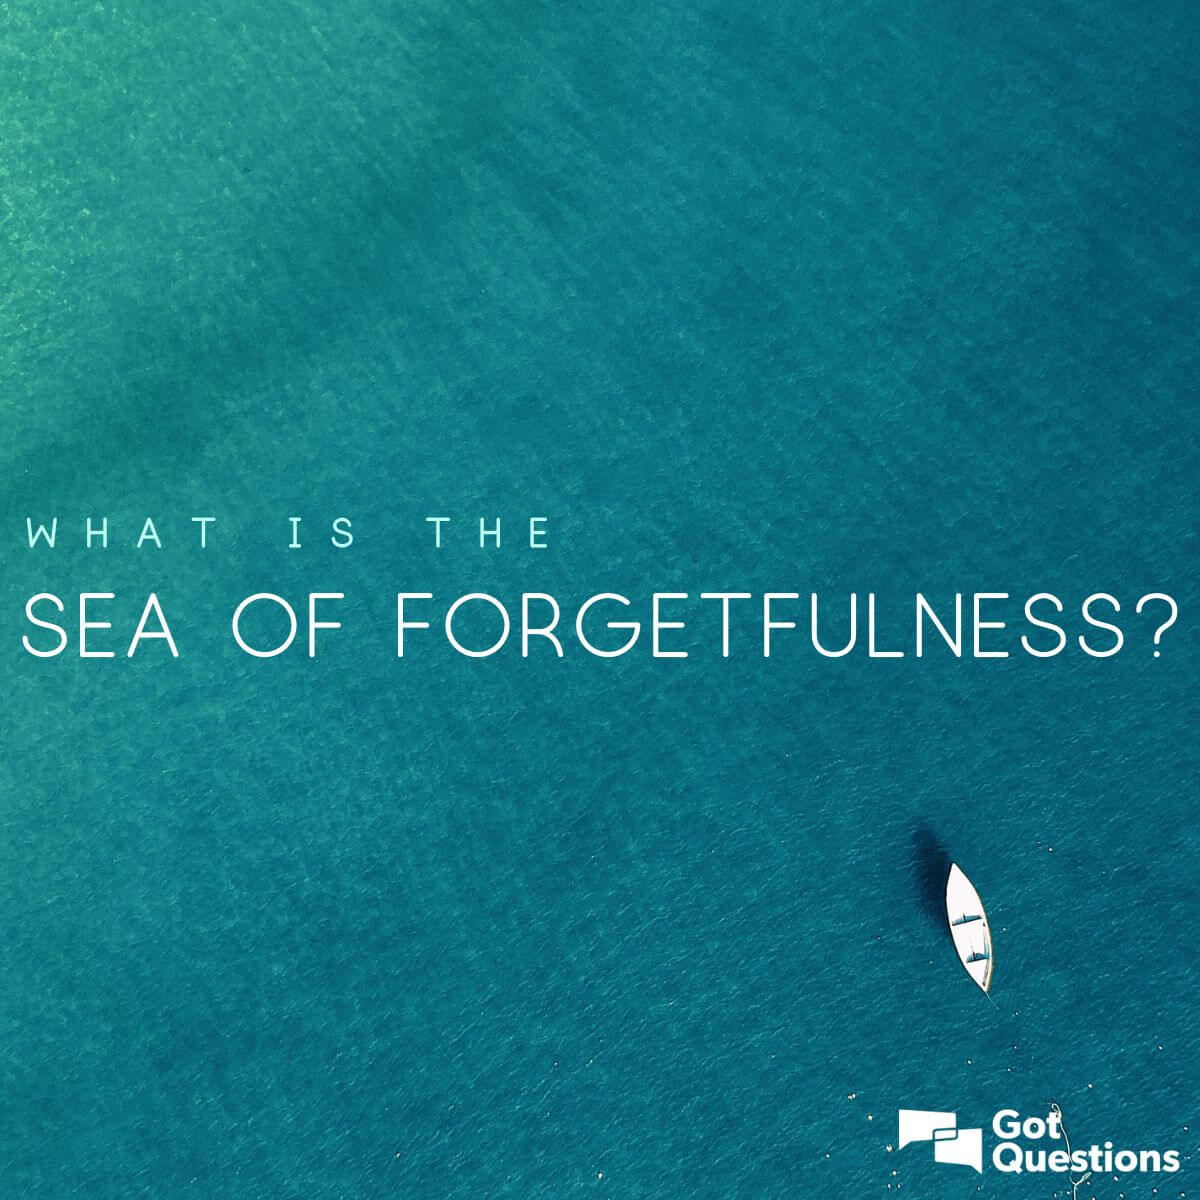 What is the sea of forgetfulness?